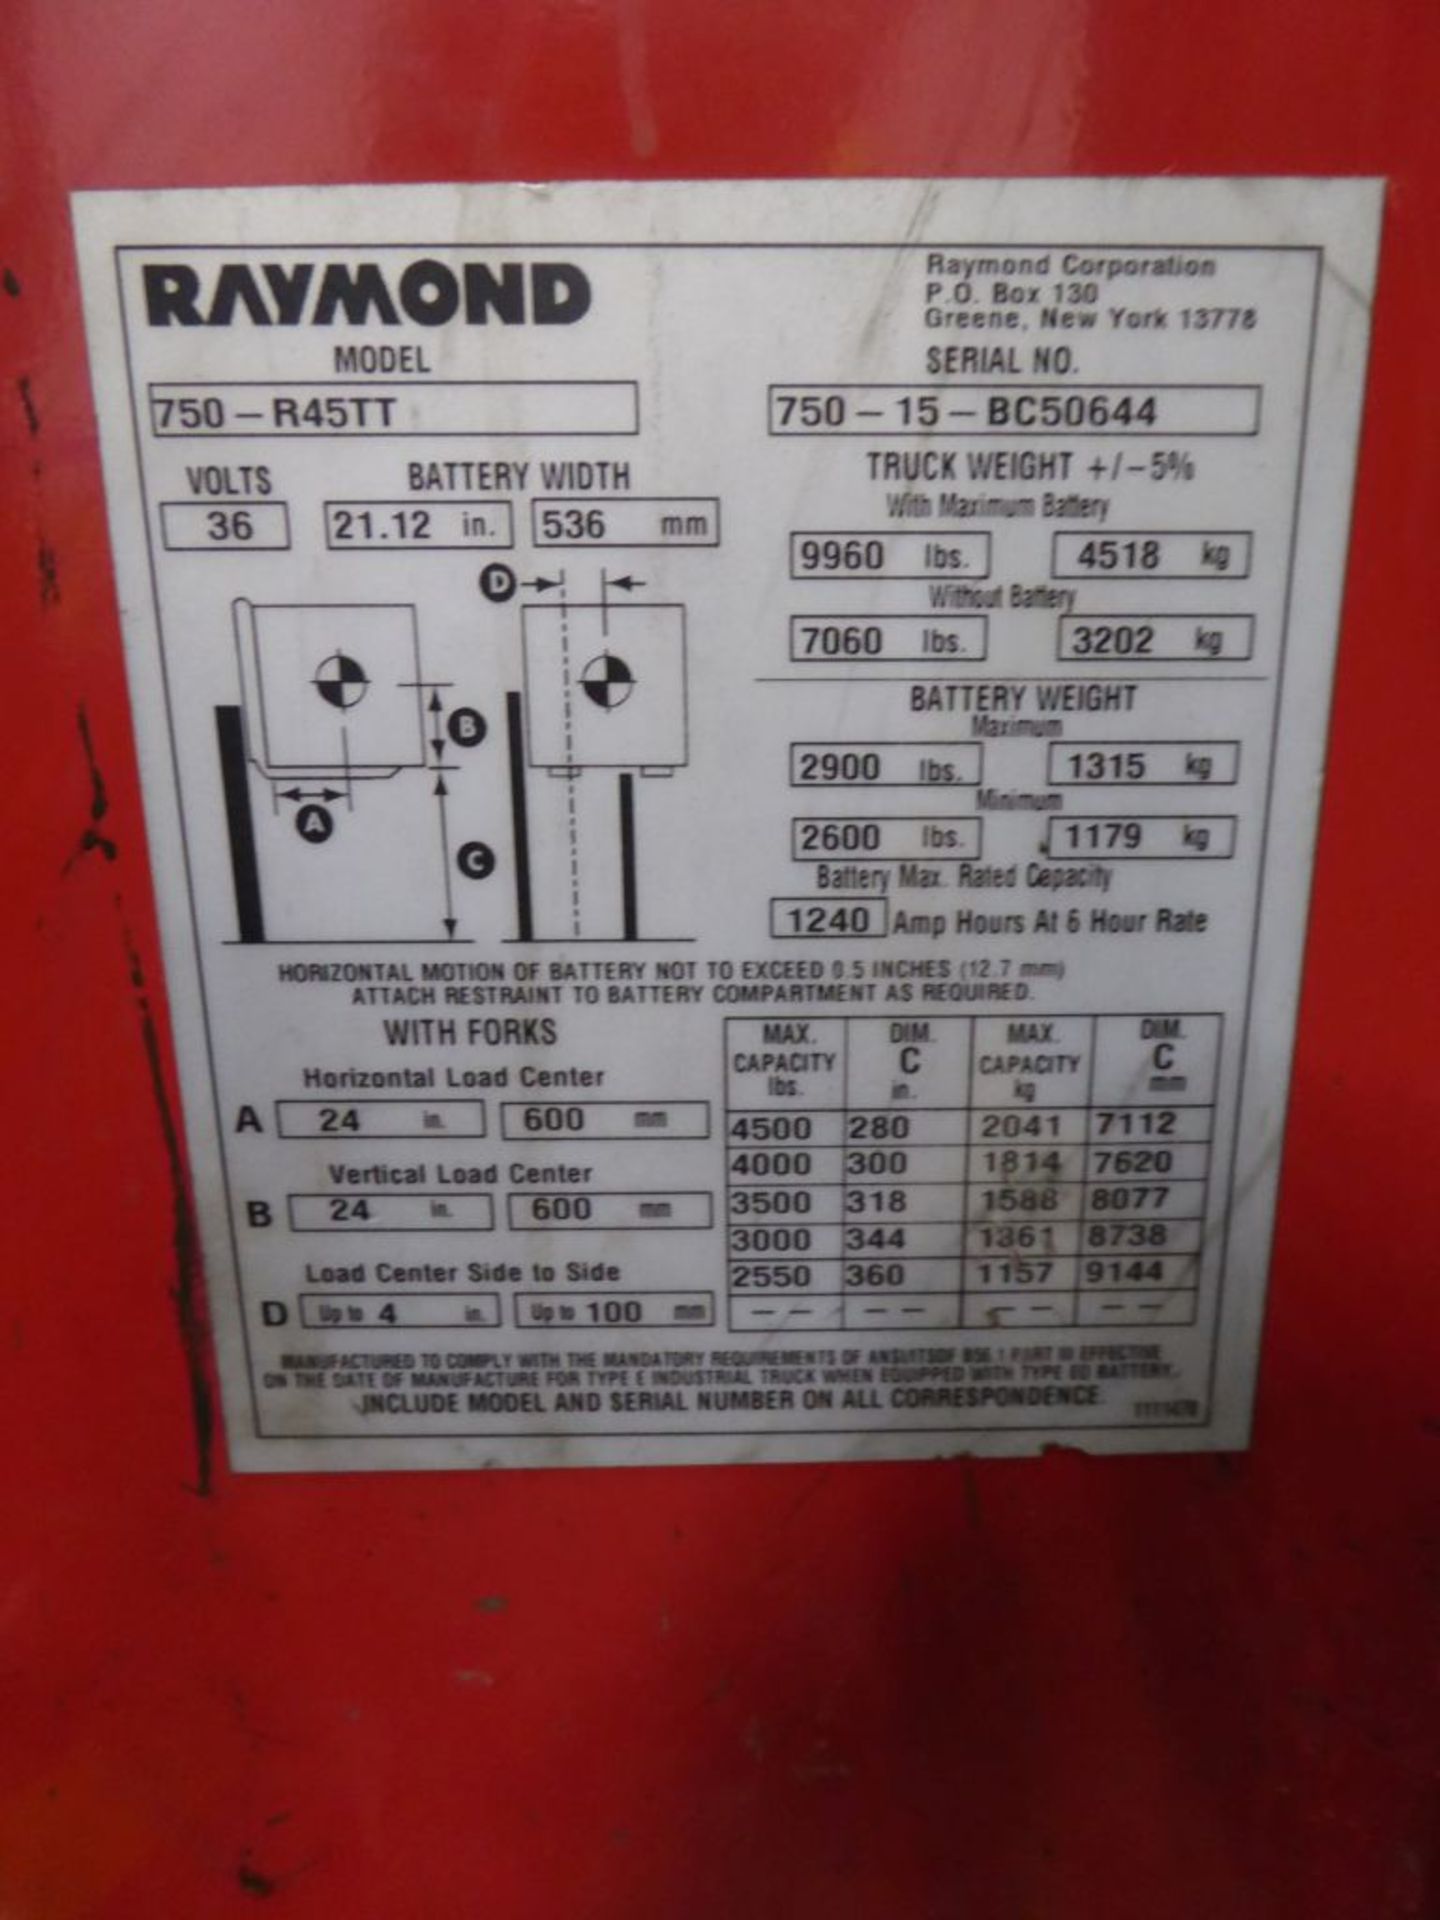 Raymond 7500 Universal Stance Reach Forklift - Image 9 of 9